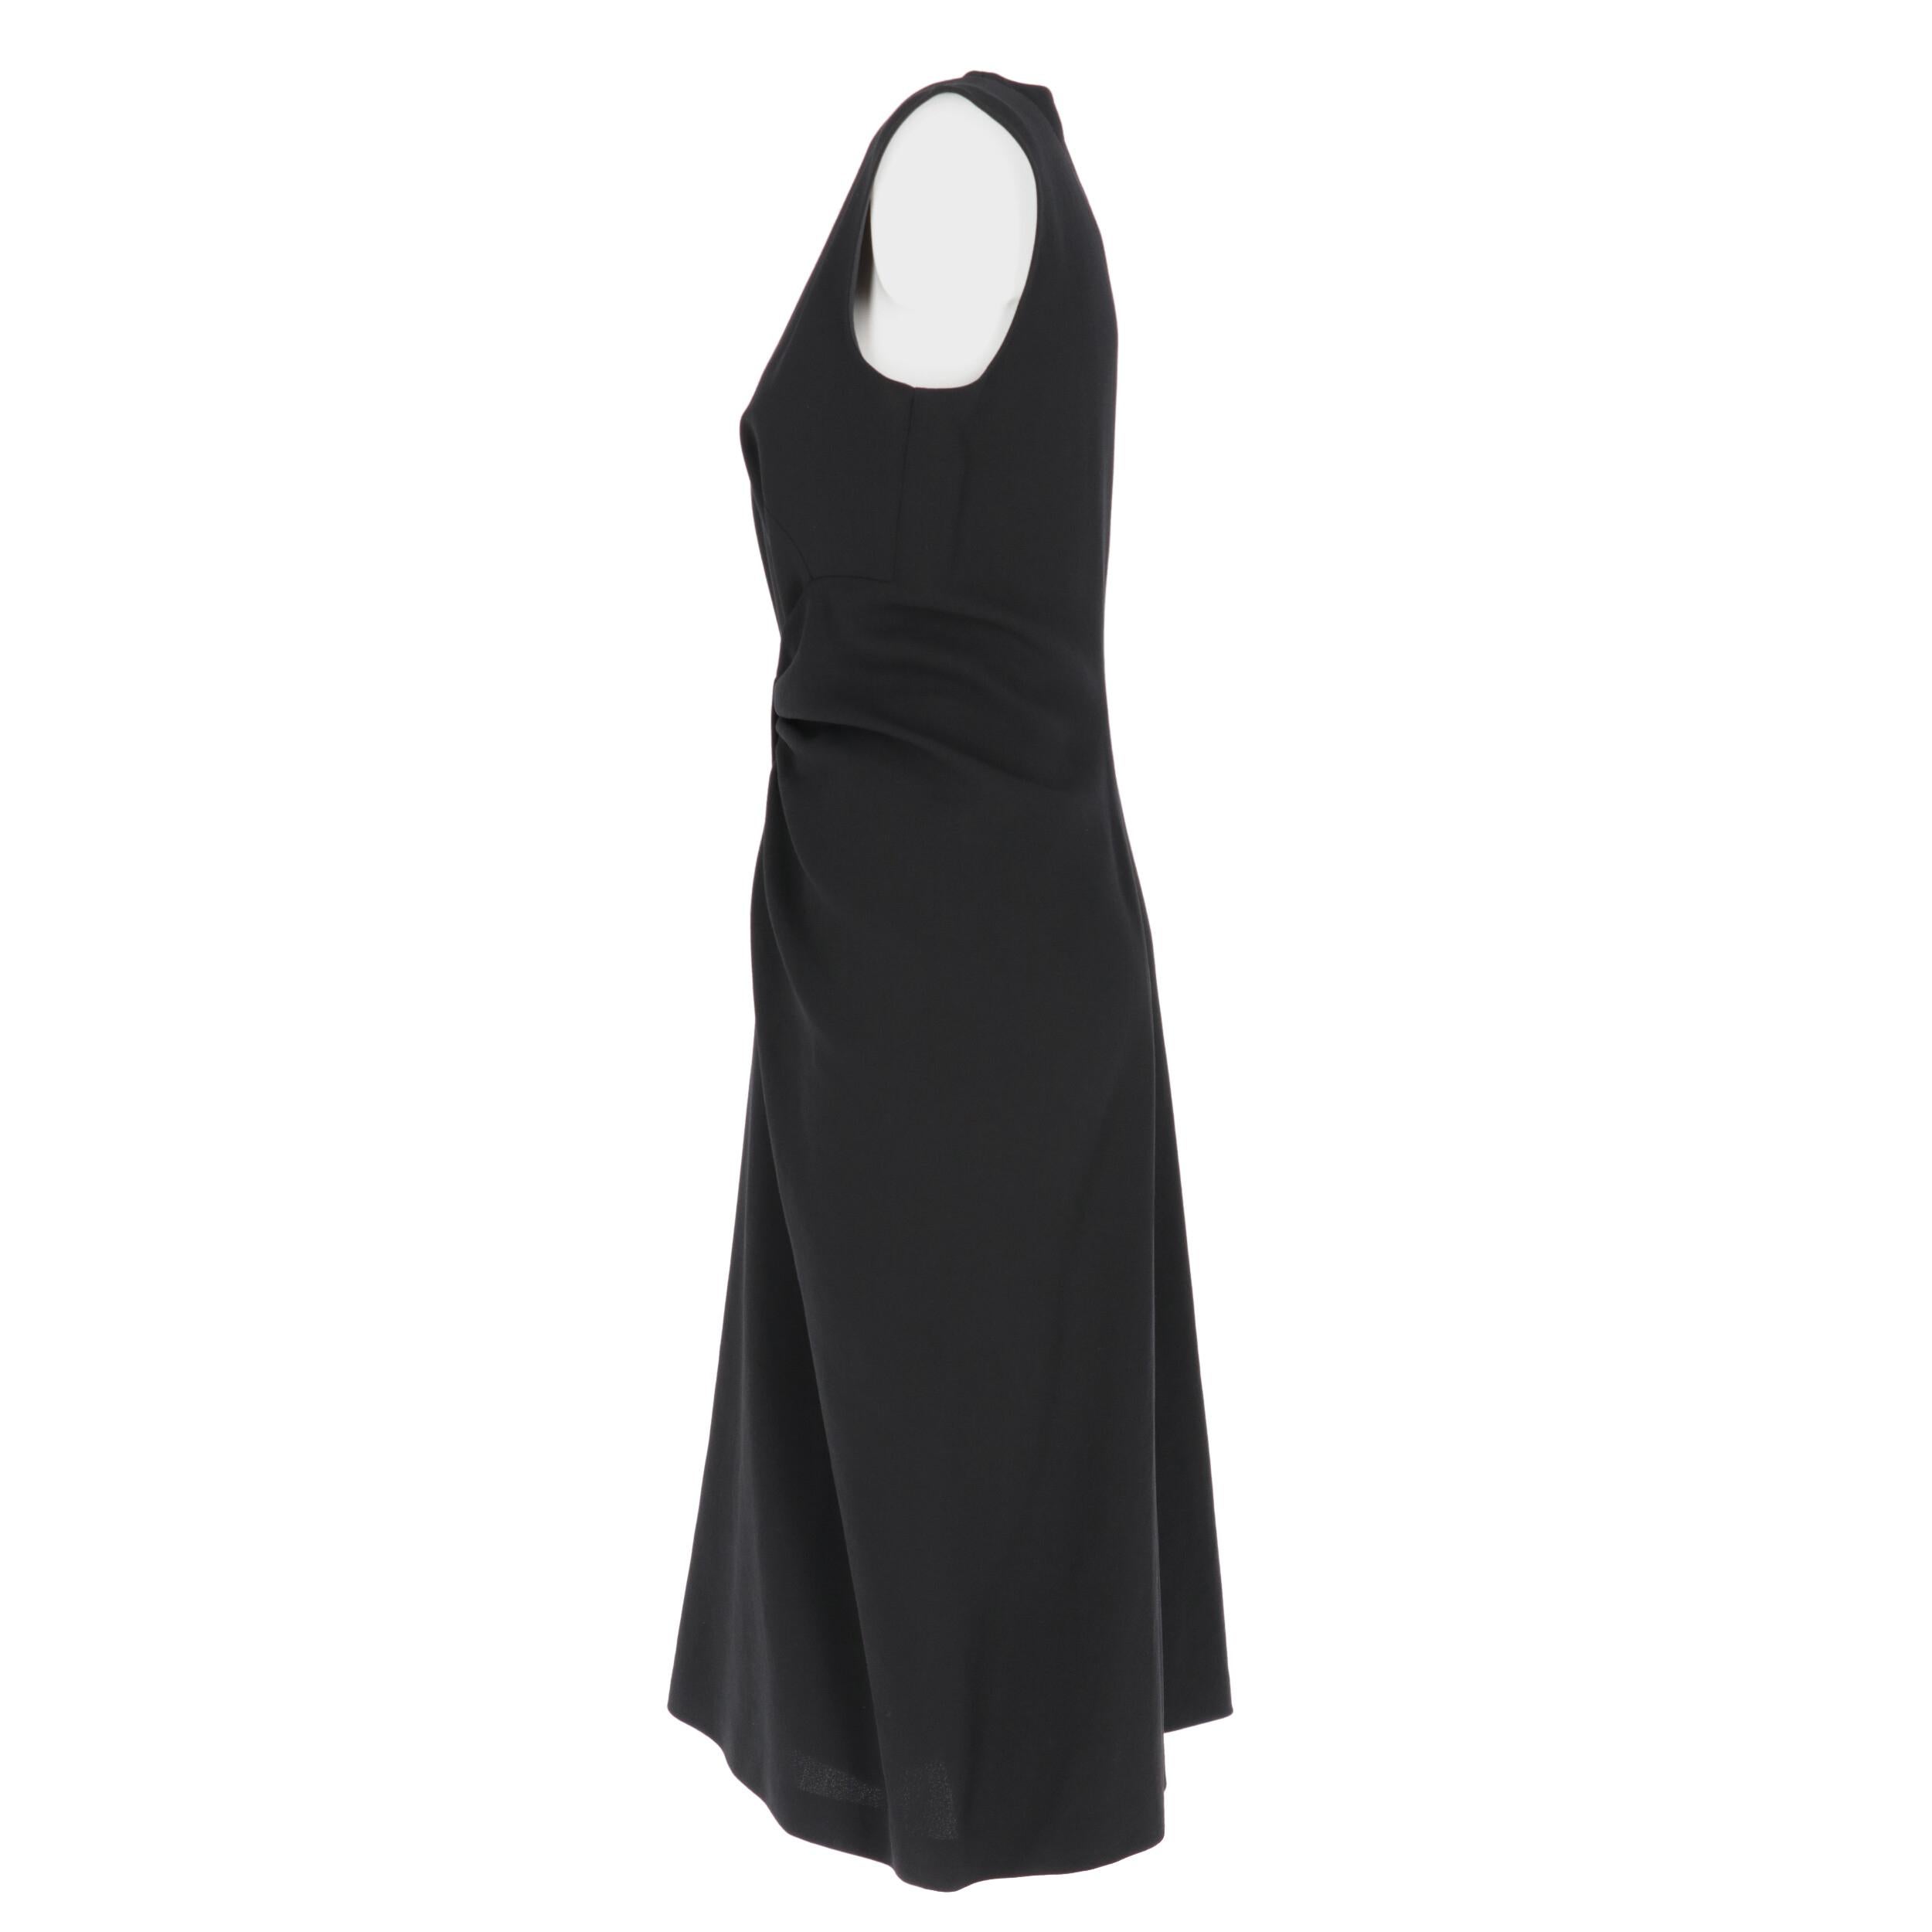 Prada black wool and silk blend crepe dress. Sleeveless crewneck model, with front drape and decorative bow at the waist. Back rear zip fastening and central pleat.
This item comes from a deadstock and has never been worn.

Years: 2000s
Made in